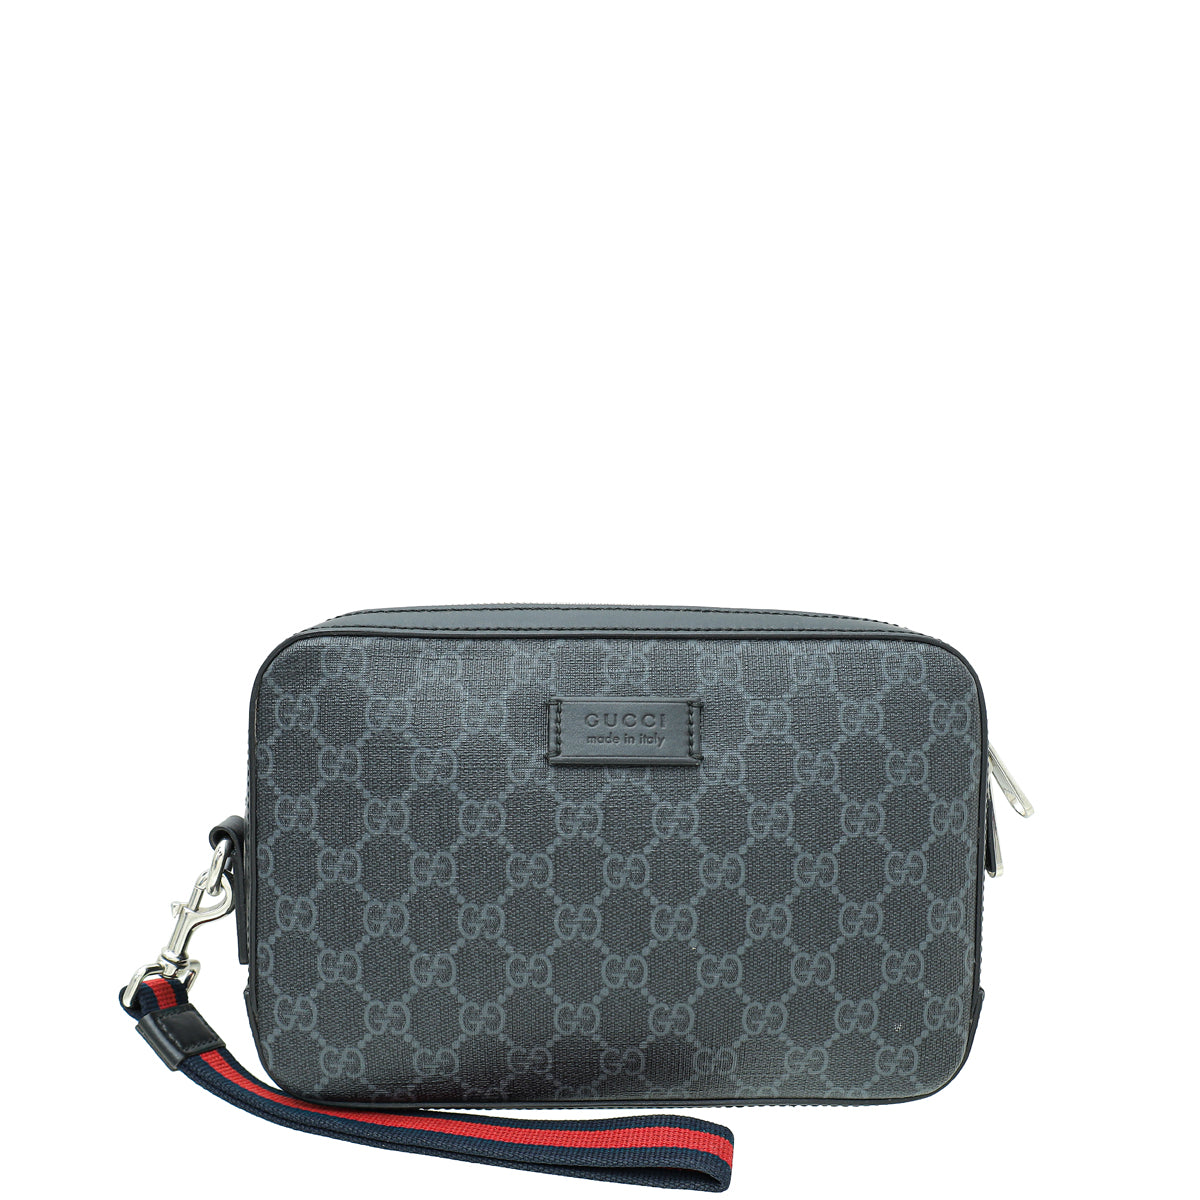 GUCCI Small Bags, Wallets & Cases Gucci Leather For Male for Men